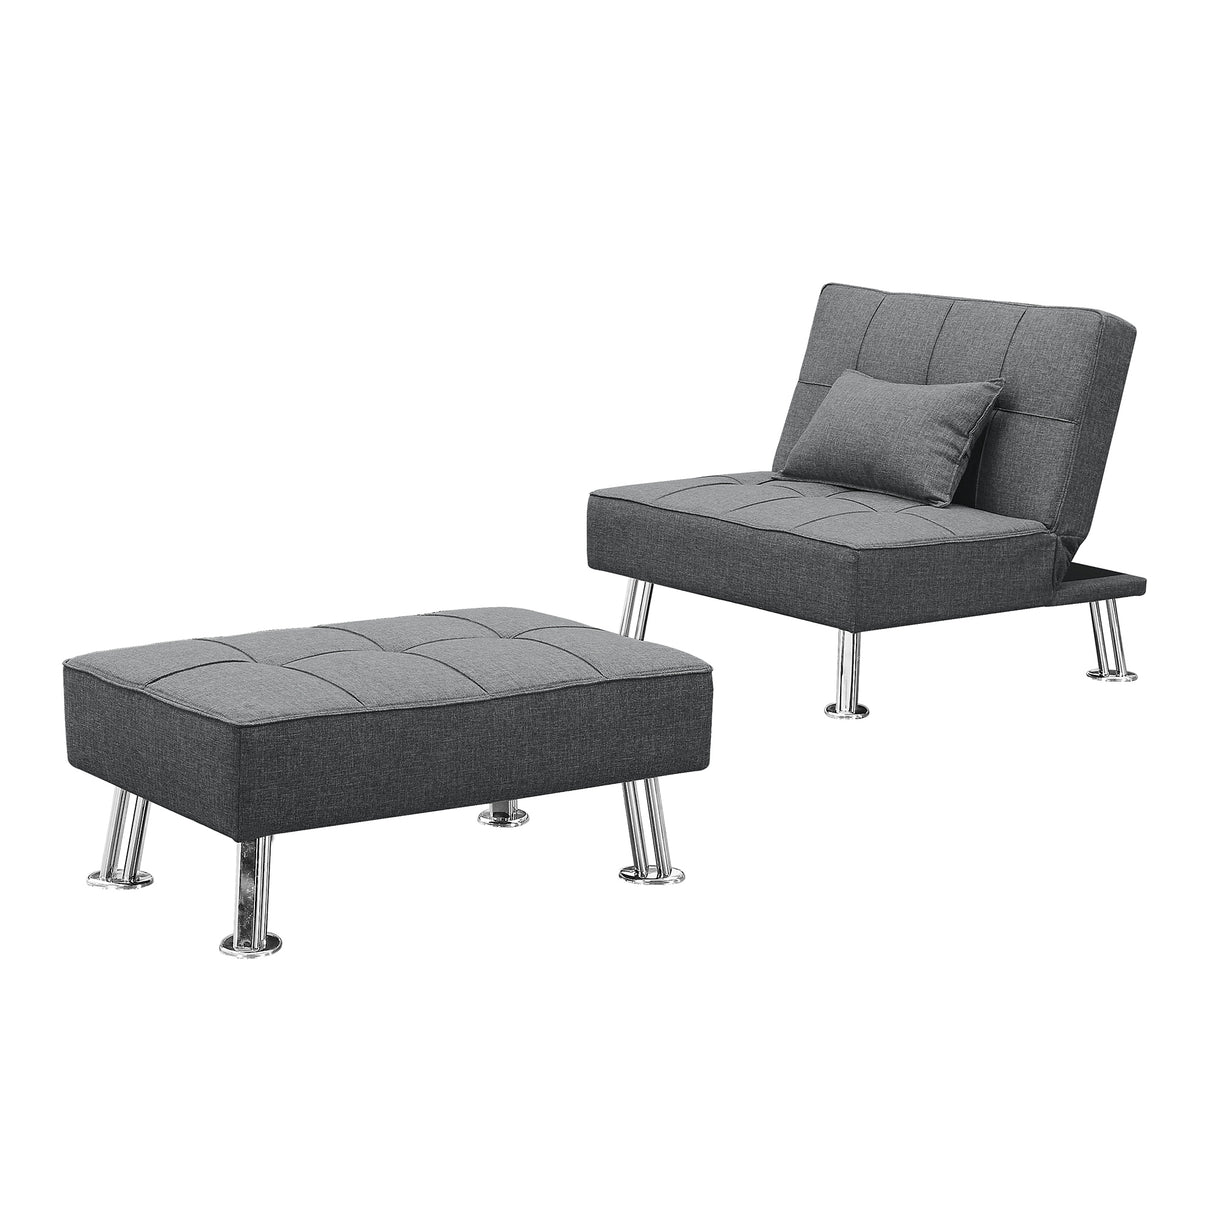 Modern Fabric Single Sofa Bed with Ottoman , Convertible Folding Futon Chair, Lounge Chair Set with Metal Legs . Home Elegance USA